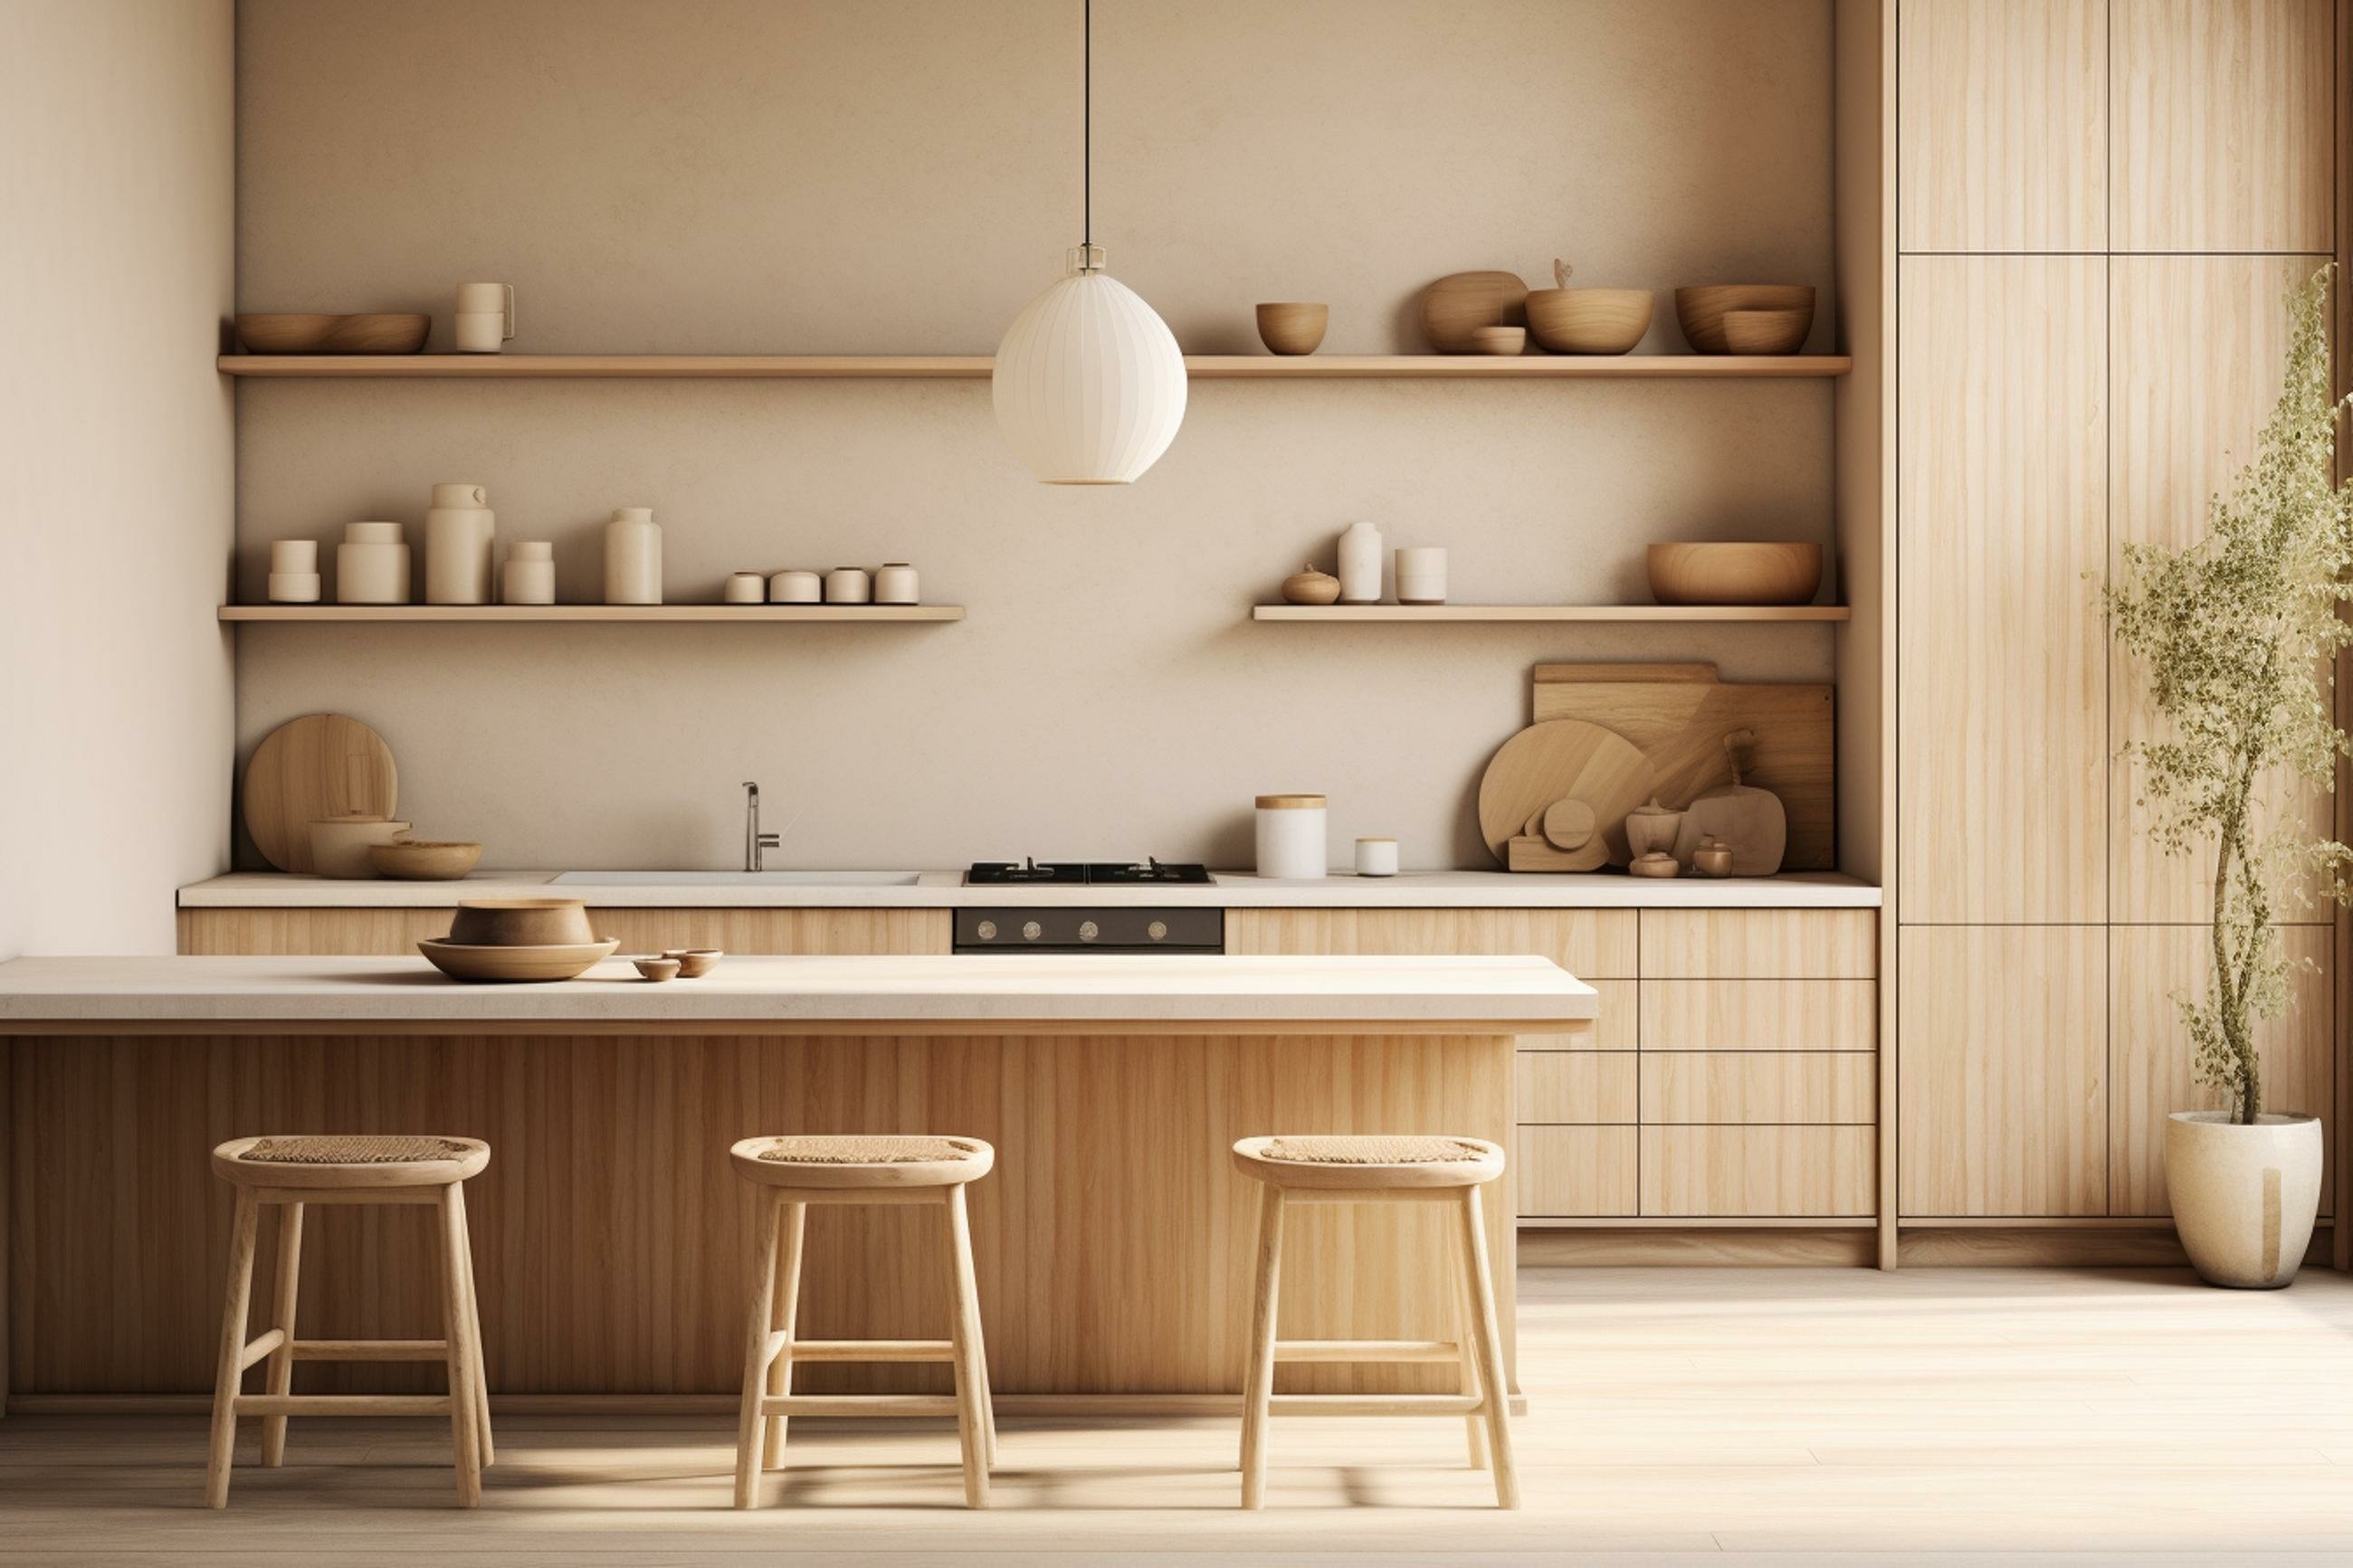 Ideas and tips to adopt Japandi style design for your kitchen.